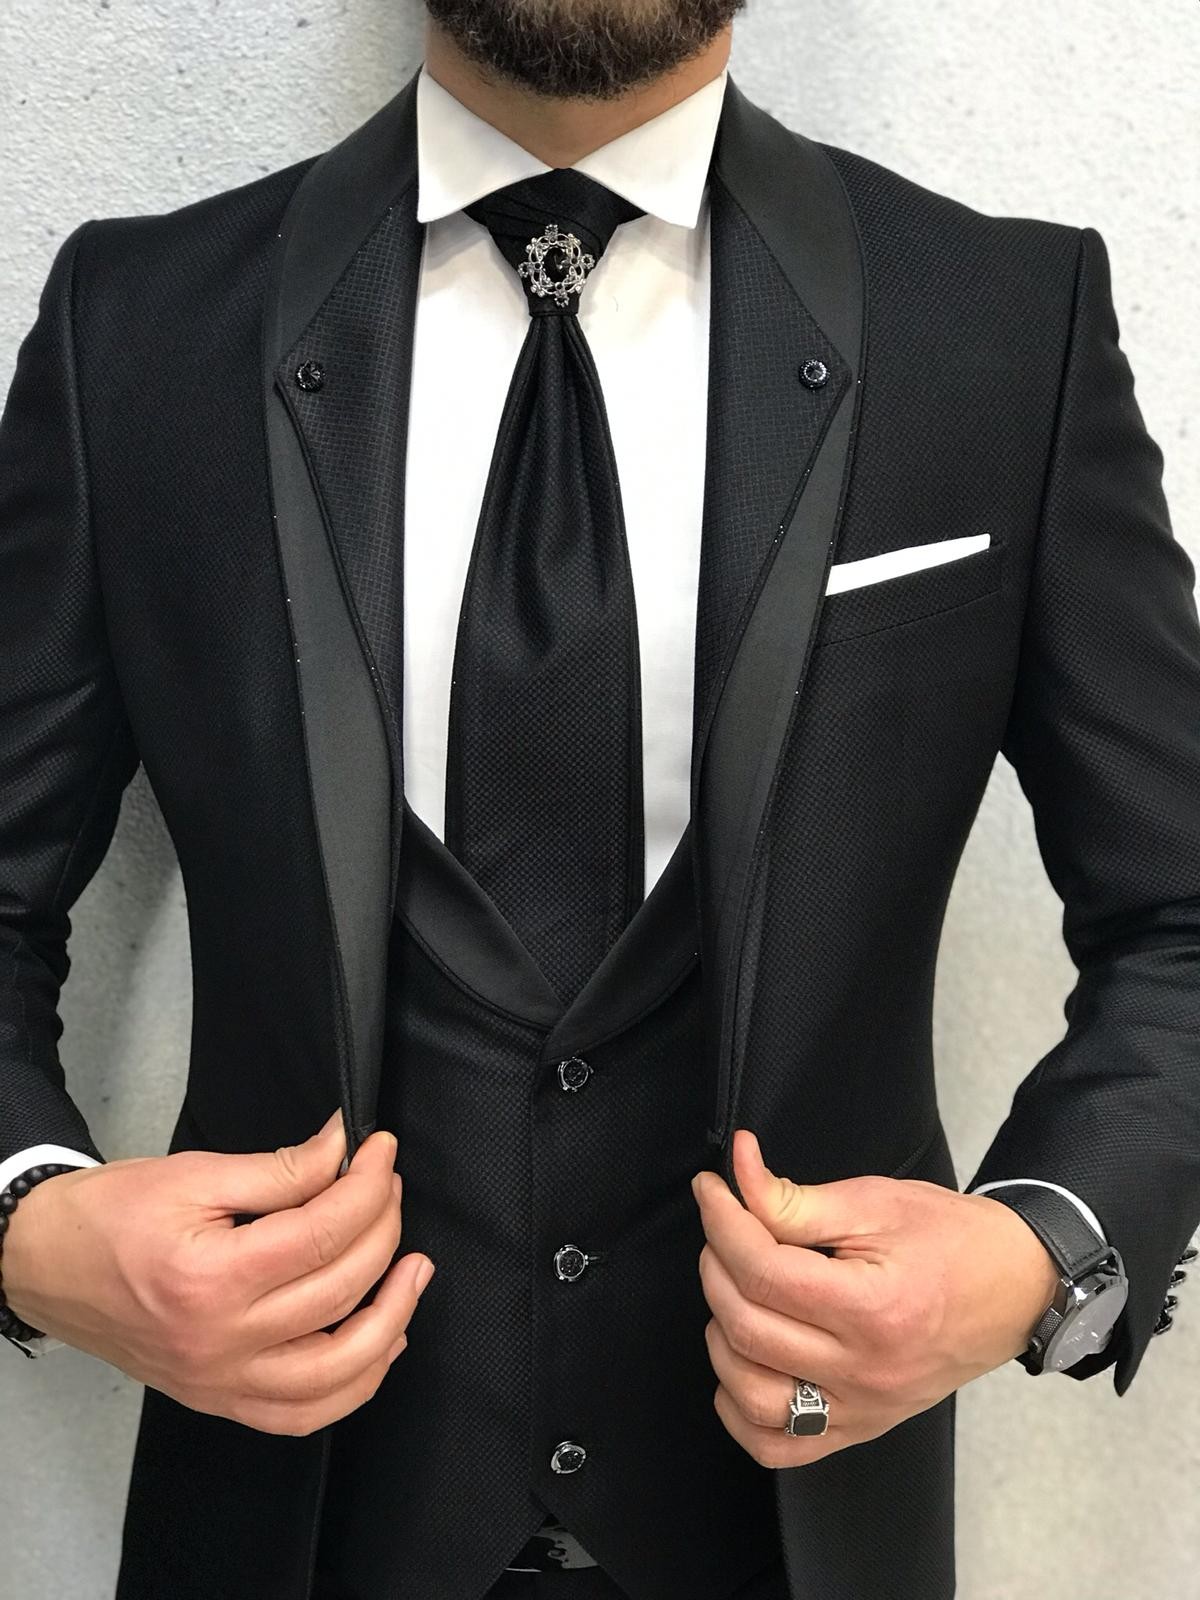 Buy Black Slim Fit Groom Suit by Gentwith.com with Free Shipping